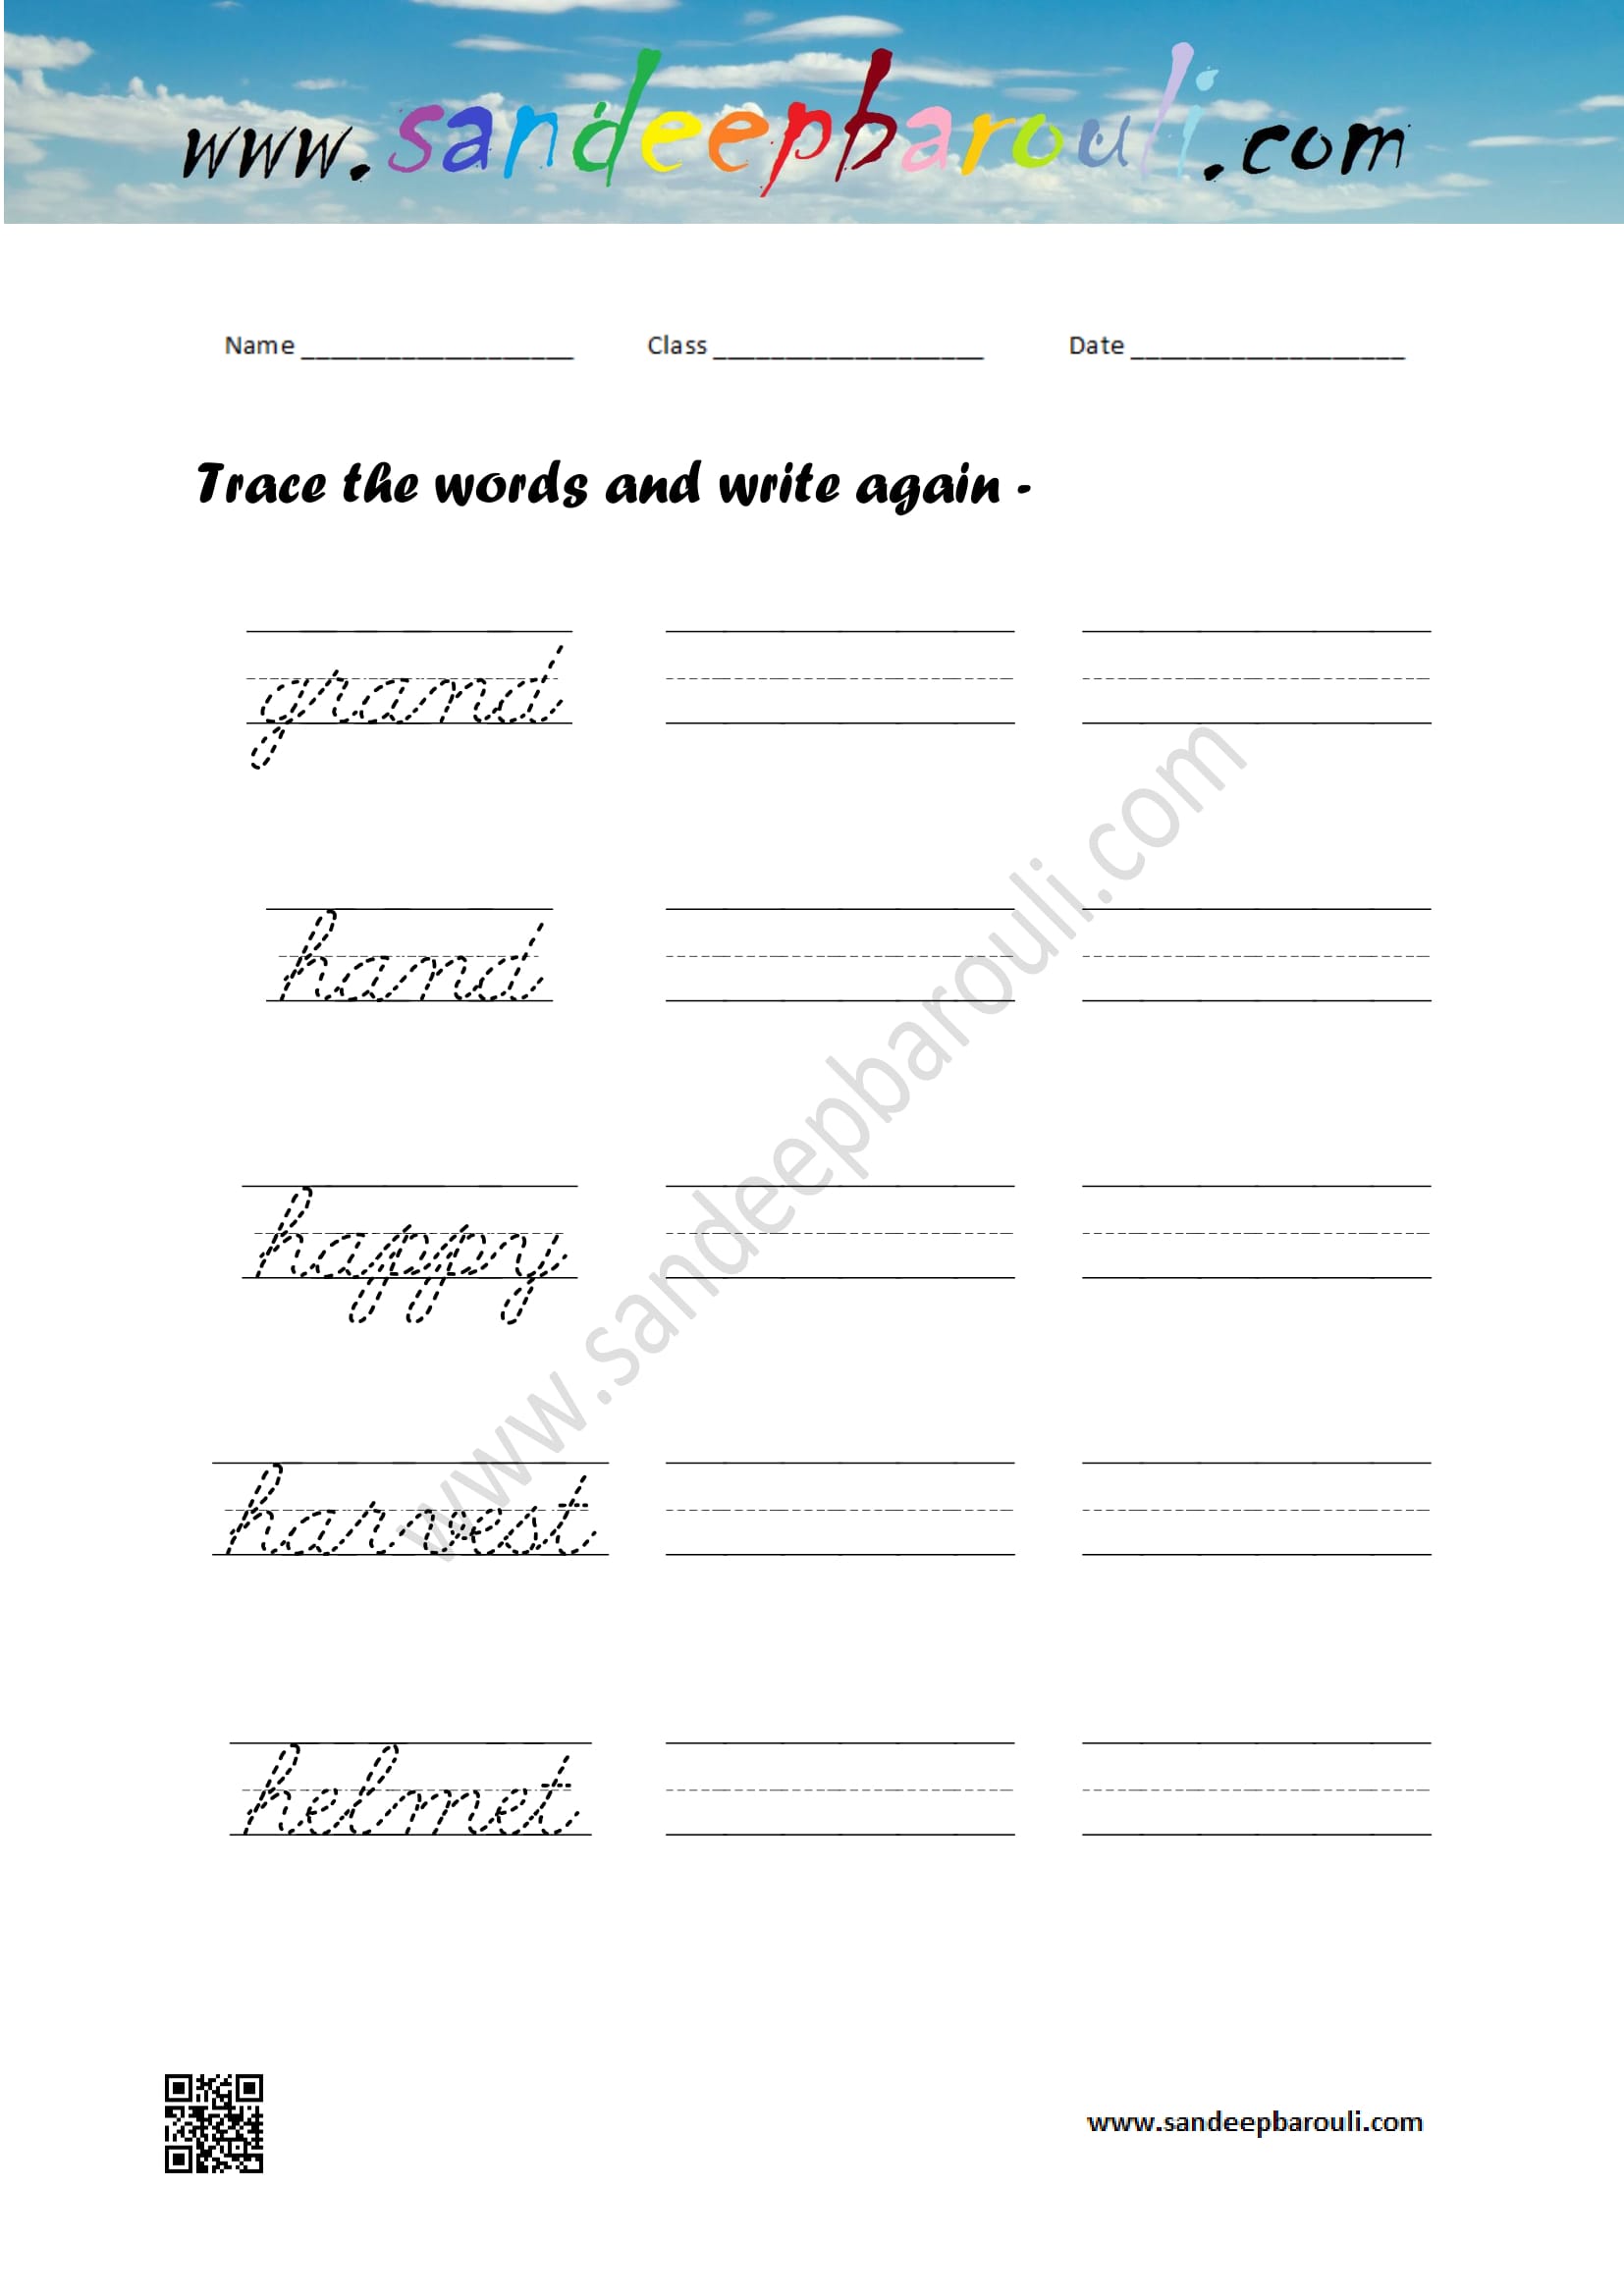 Cursive writing worksheet – trace the words and write again (45)